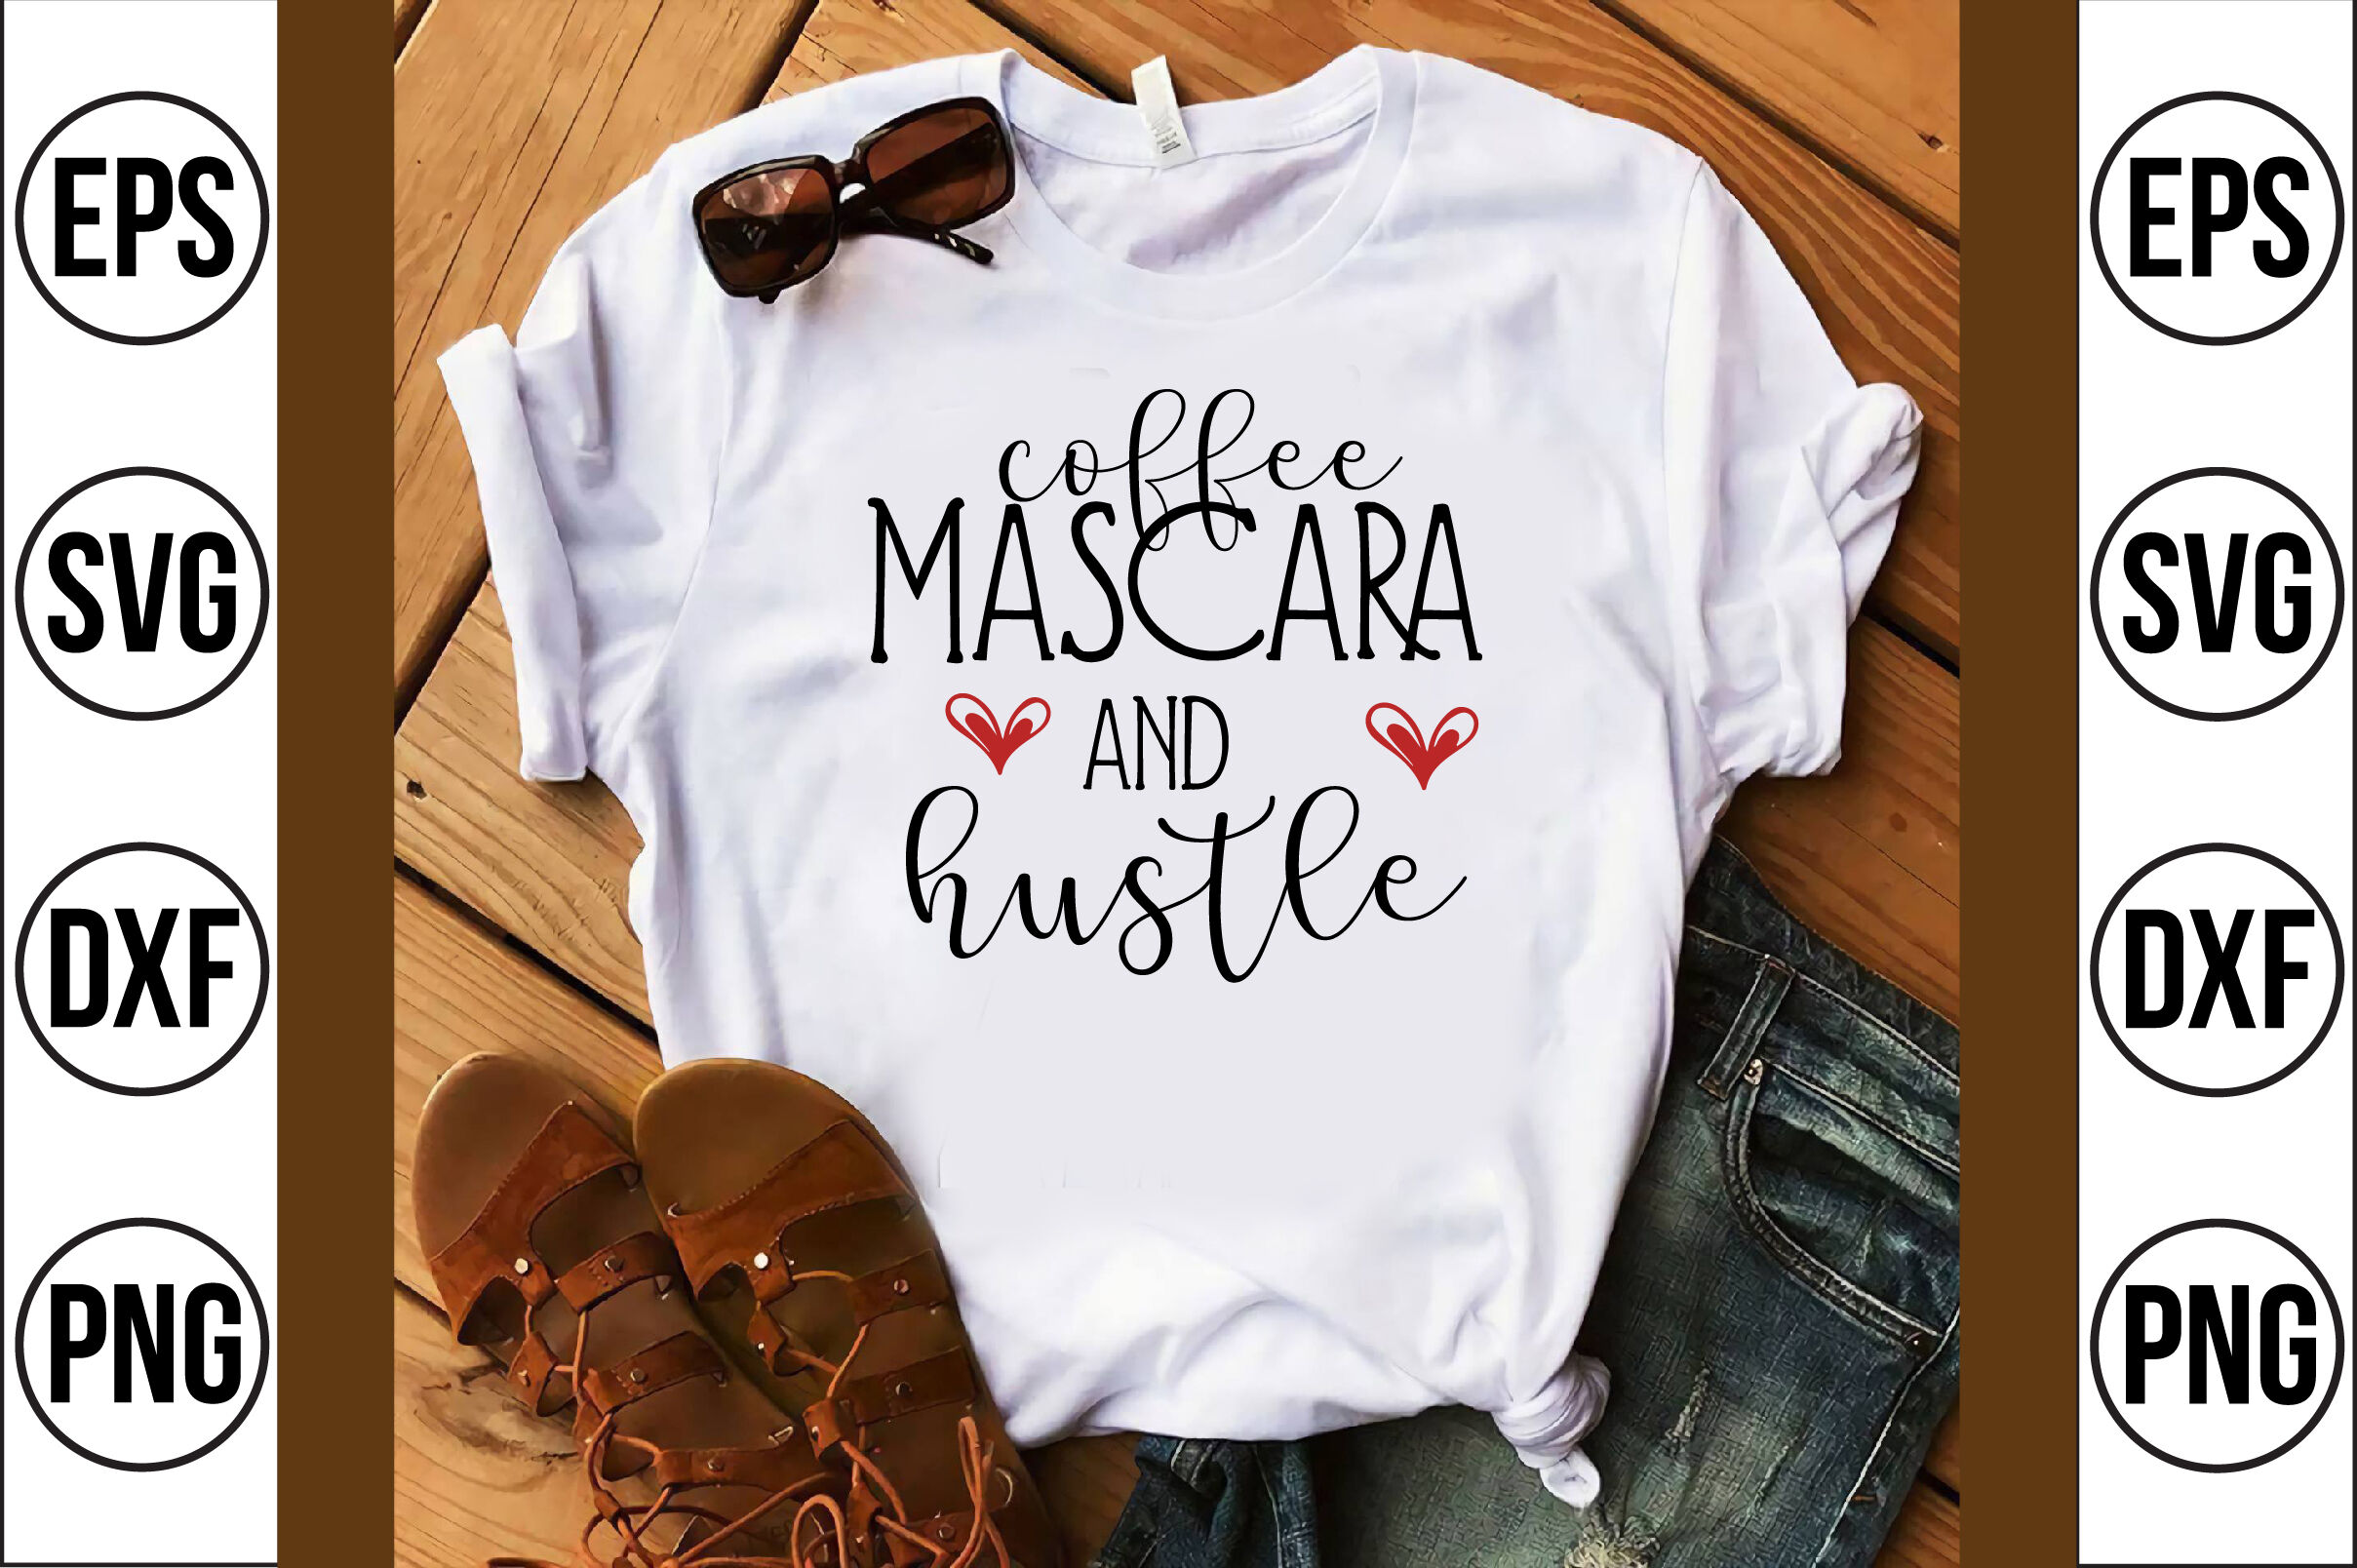 Download Coffee Mascara And Hustle Svg Cut File By Teebusiness Thehungryjpeg Com